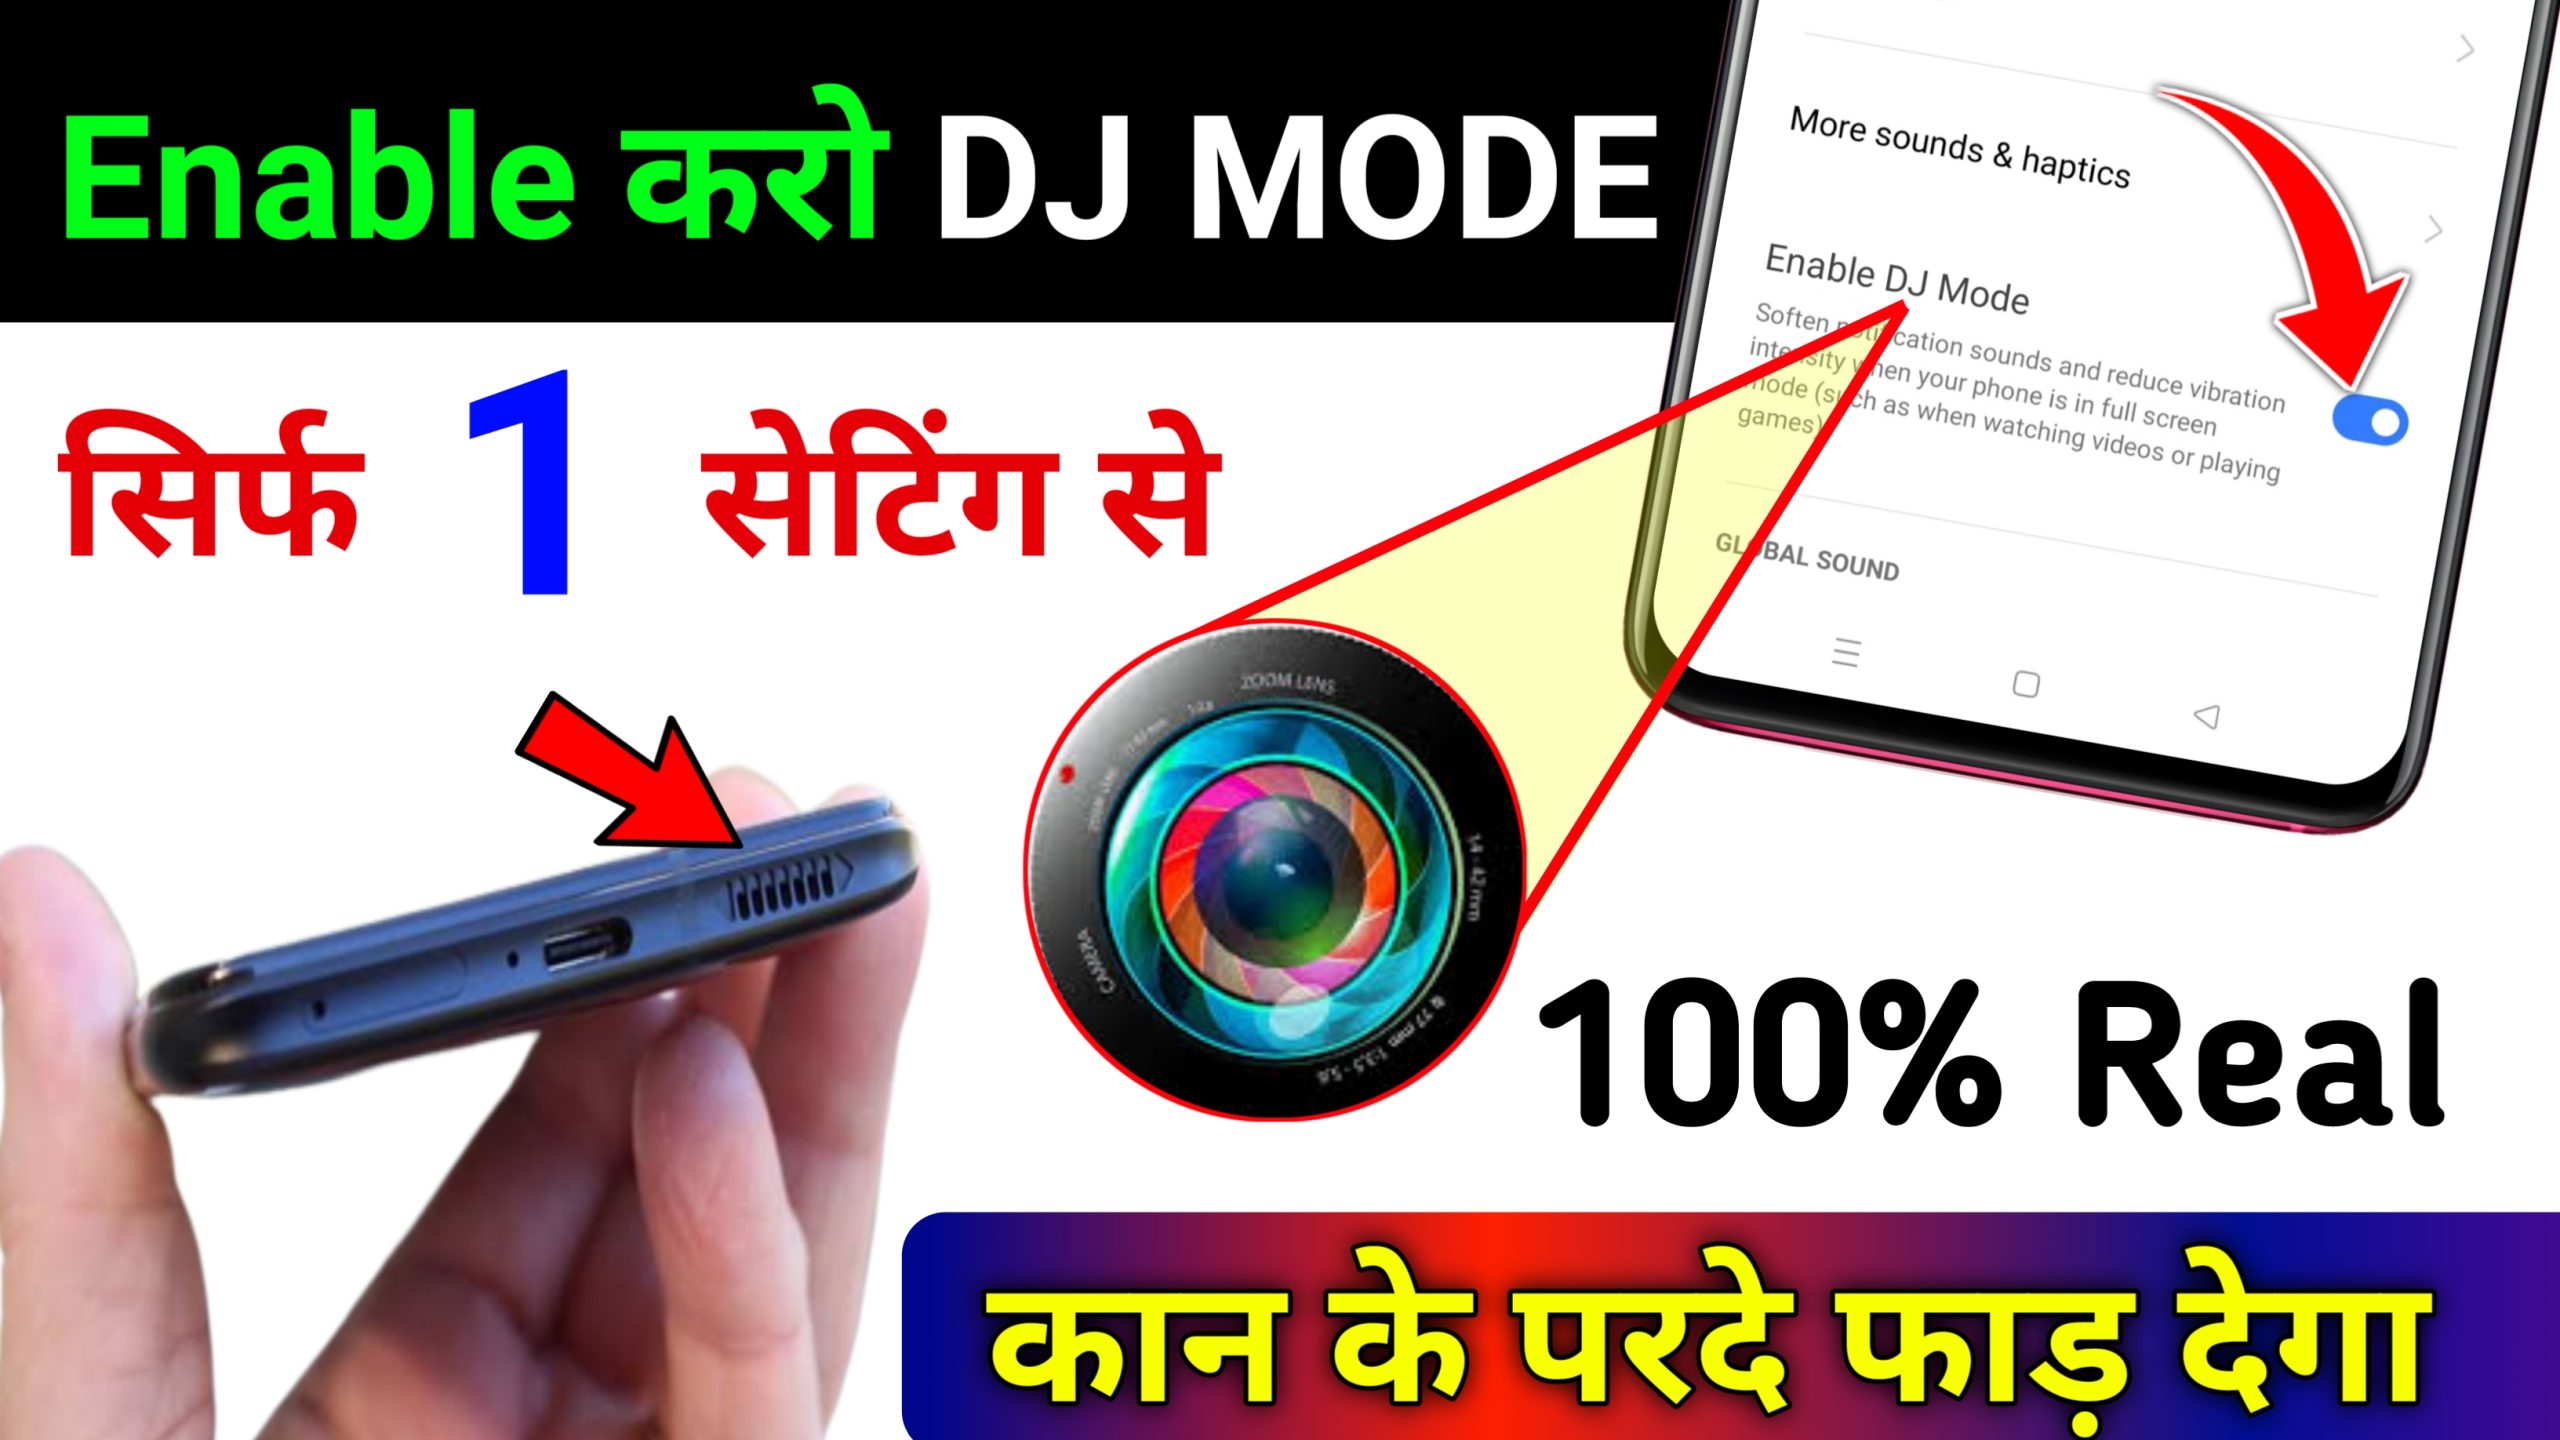 Android Phone ki Volume Kaise badhaye? | How to increase Volume in android phone?